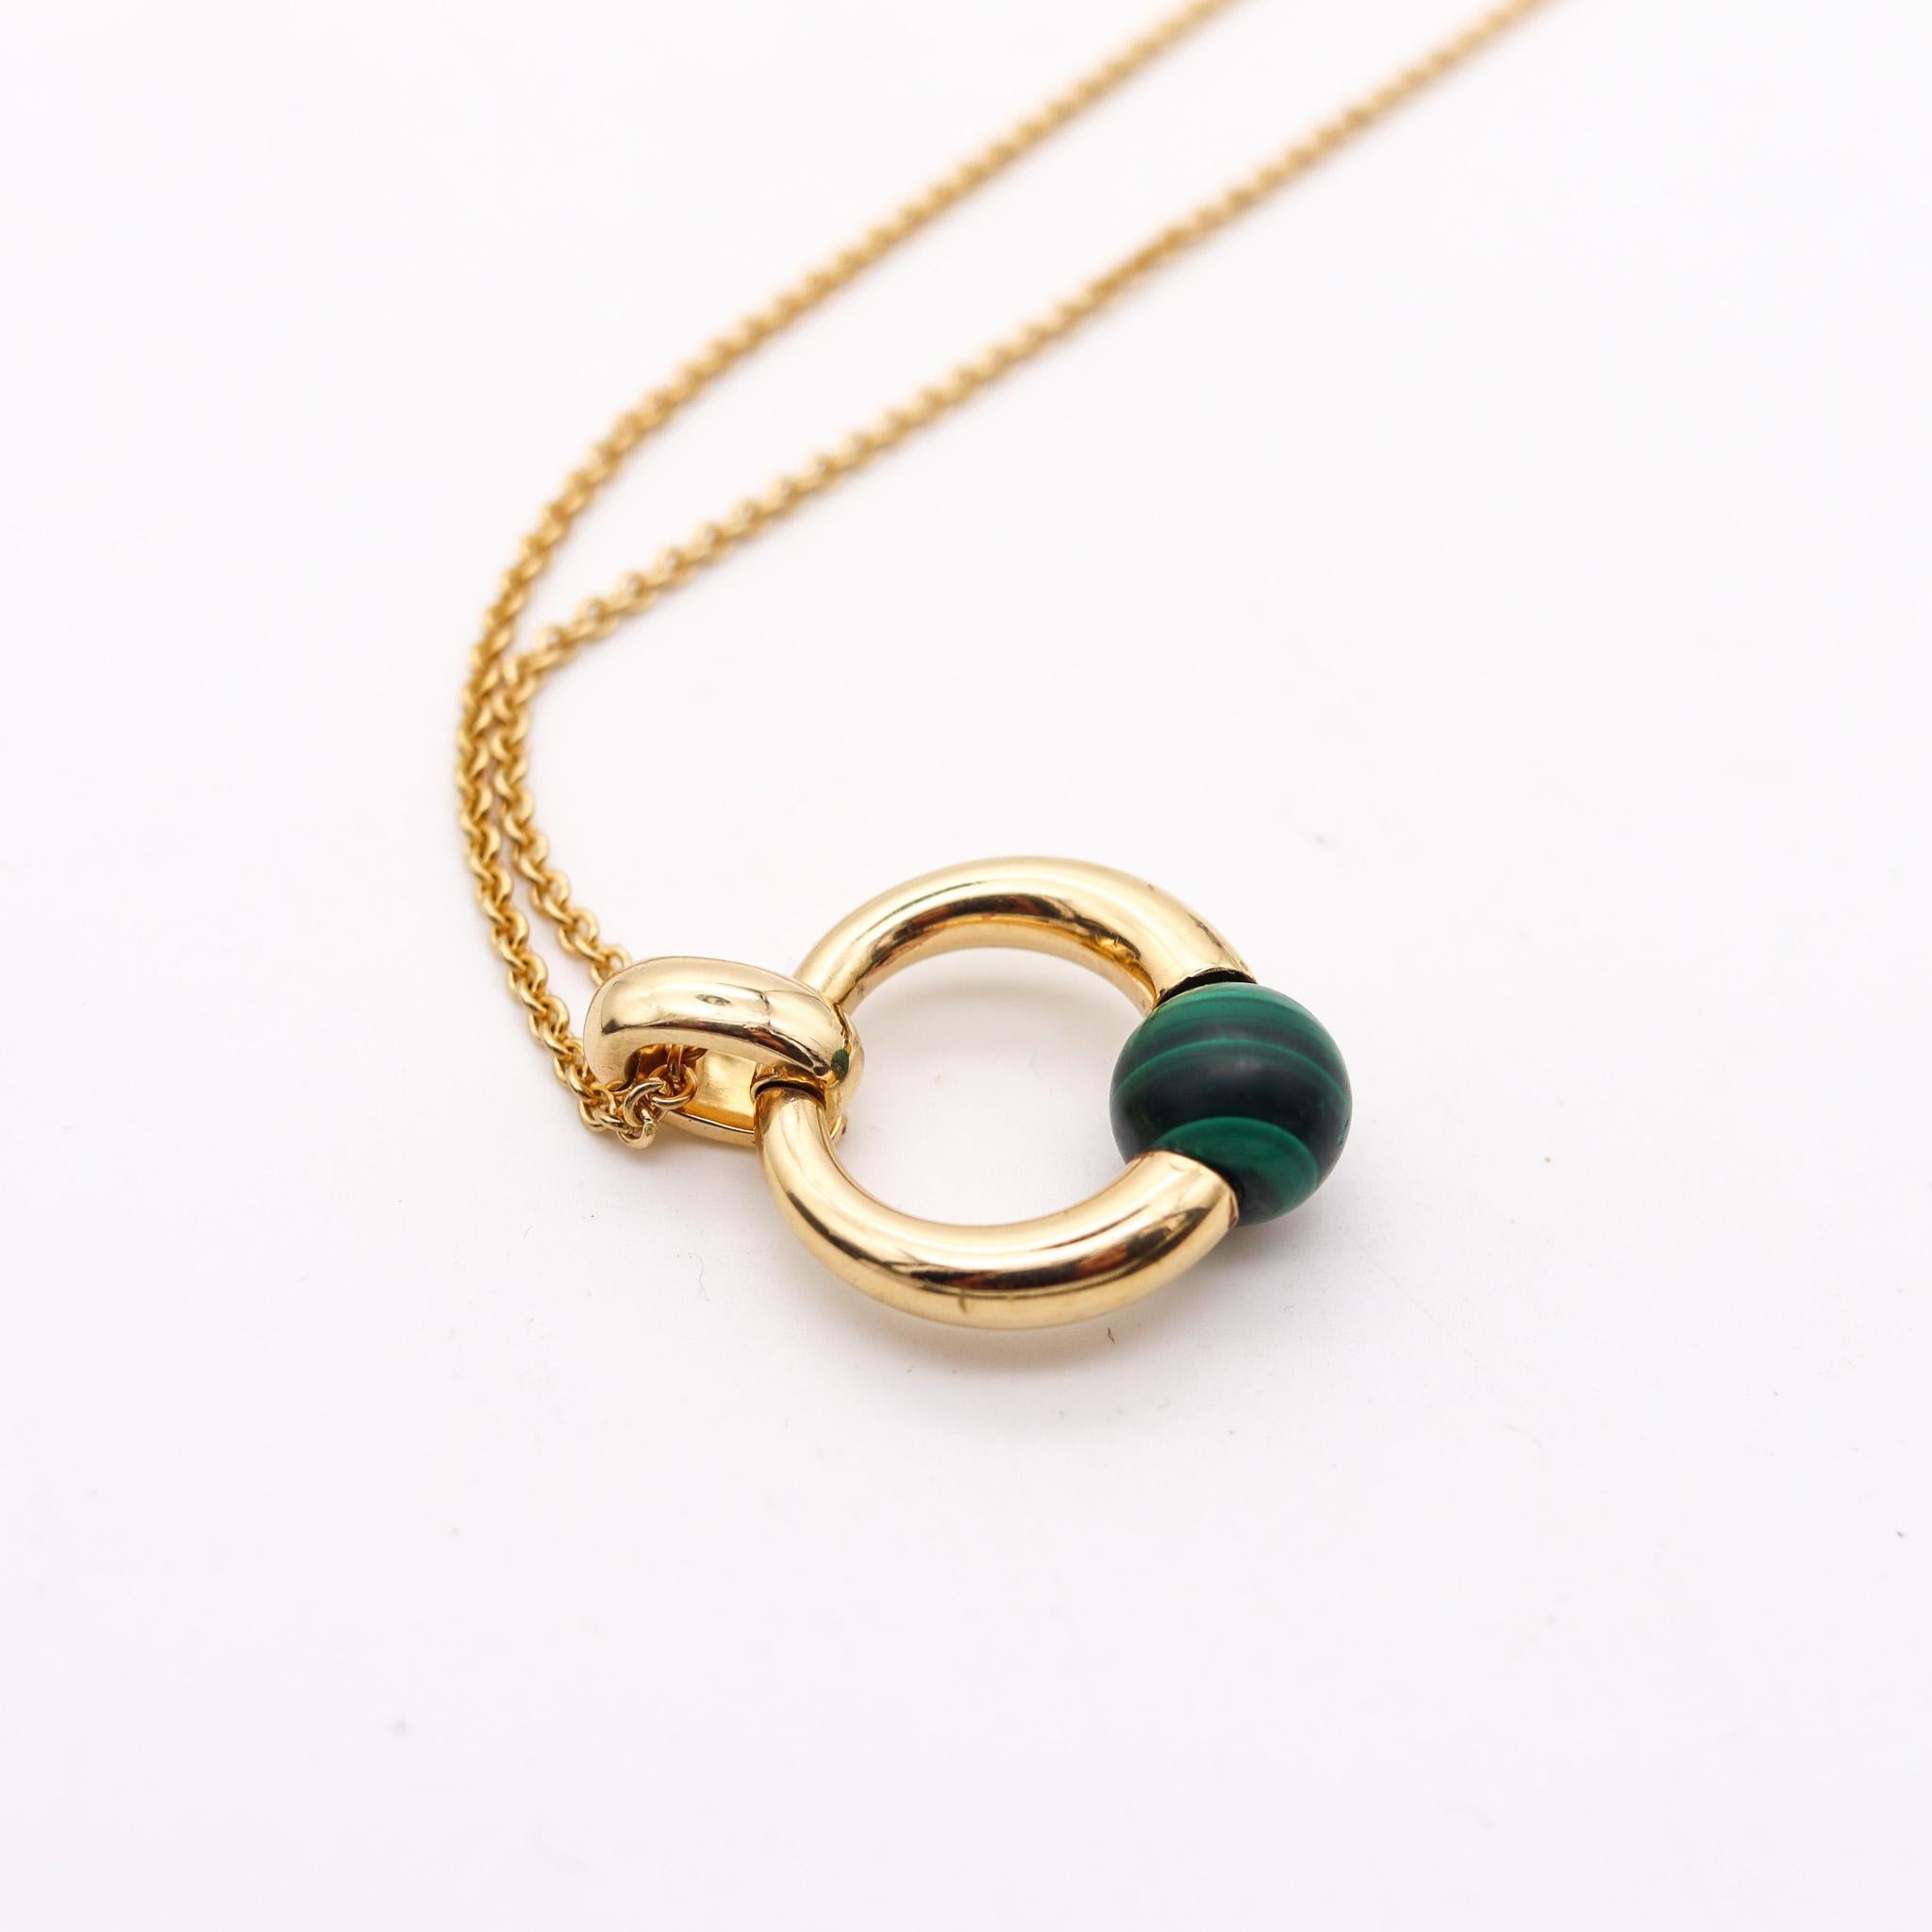 Modern Cartier Paris 1994 Rare Necklace Pendant In 18Kt Yellow Gold With Malachite For Sale